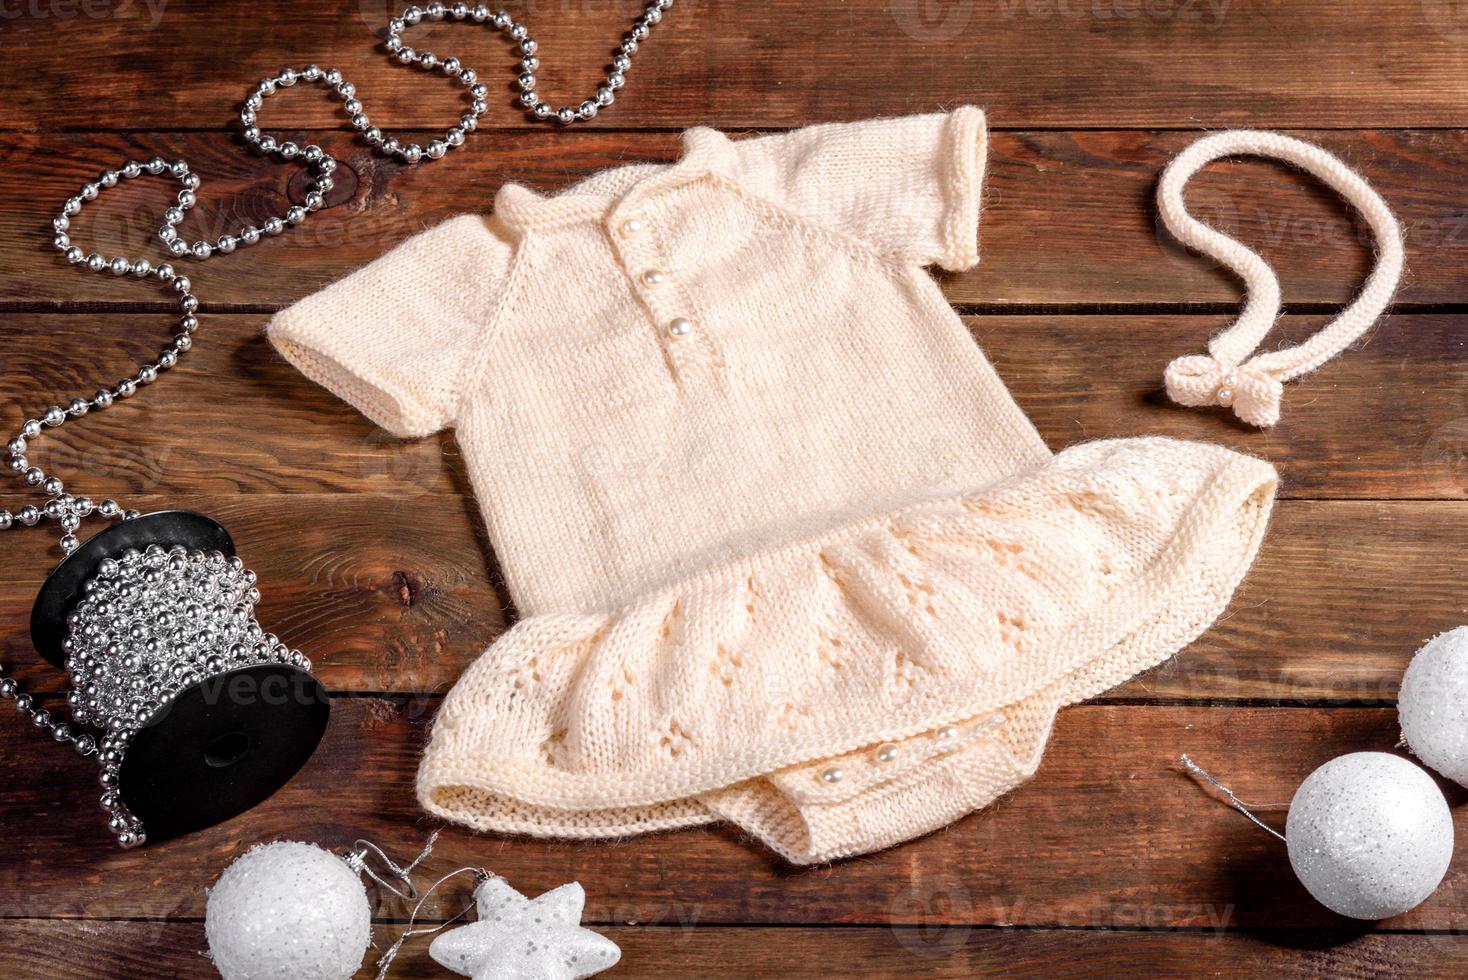 Children's knitted clothes are white in natural wool photo